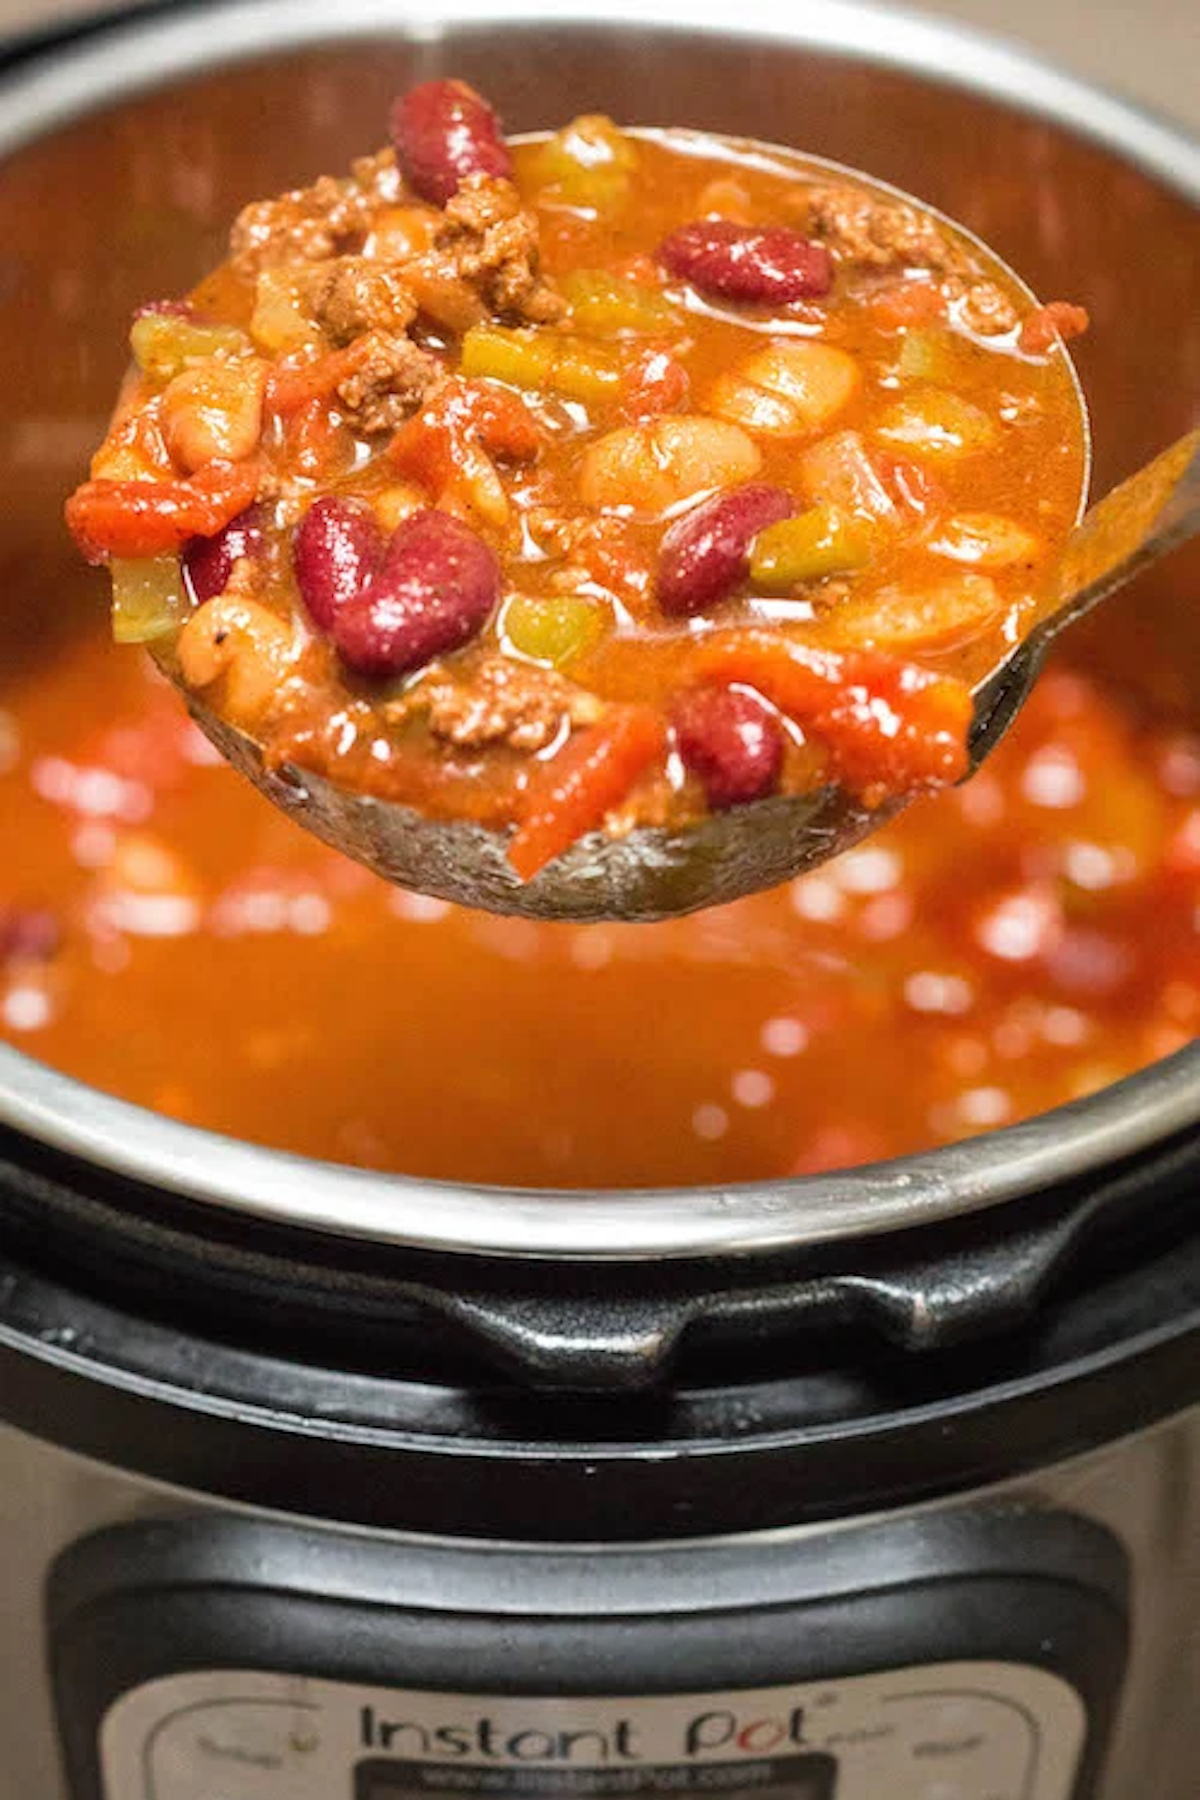 A ladle filled with Wendy's chili. An Instant Pot is out of focus in the background.